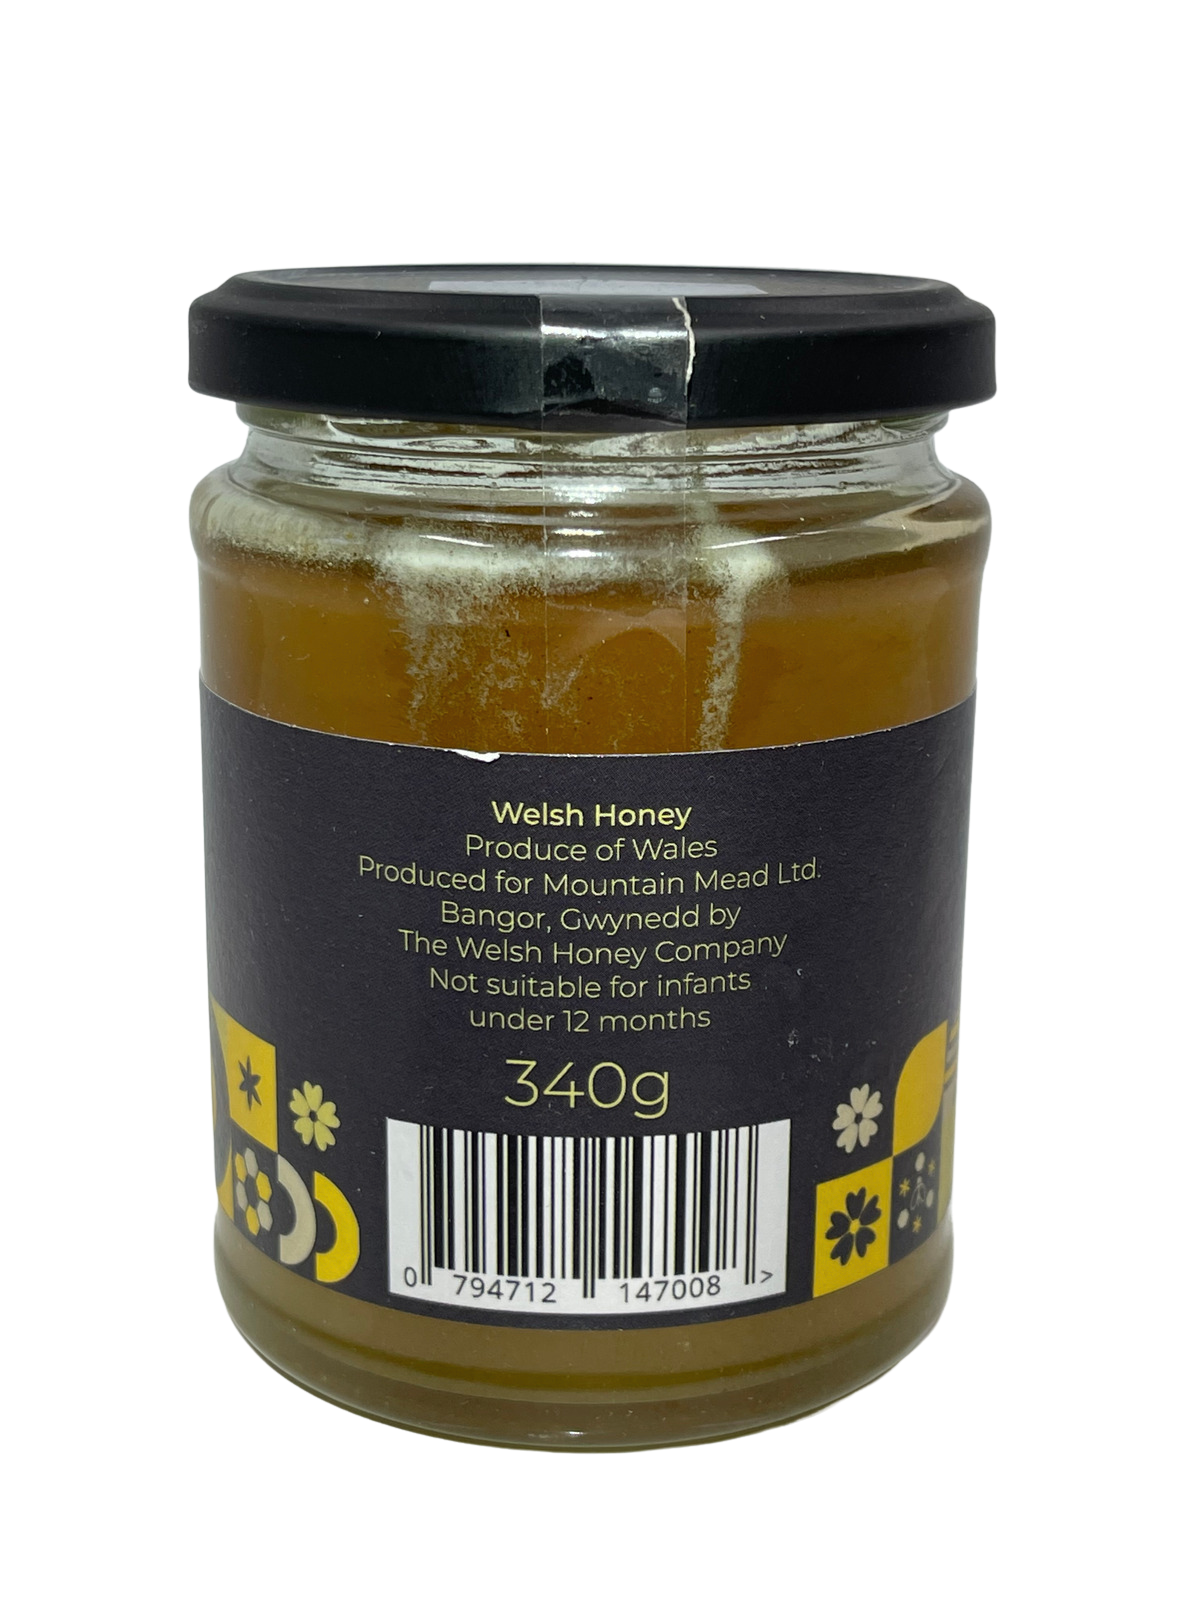 Welsh Honey Gift Set 340g With Wooden Honey Drizzler and Bee Decoration